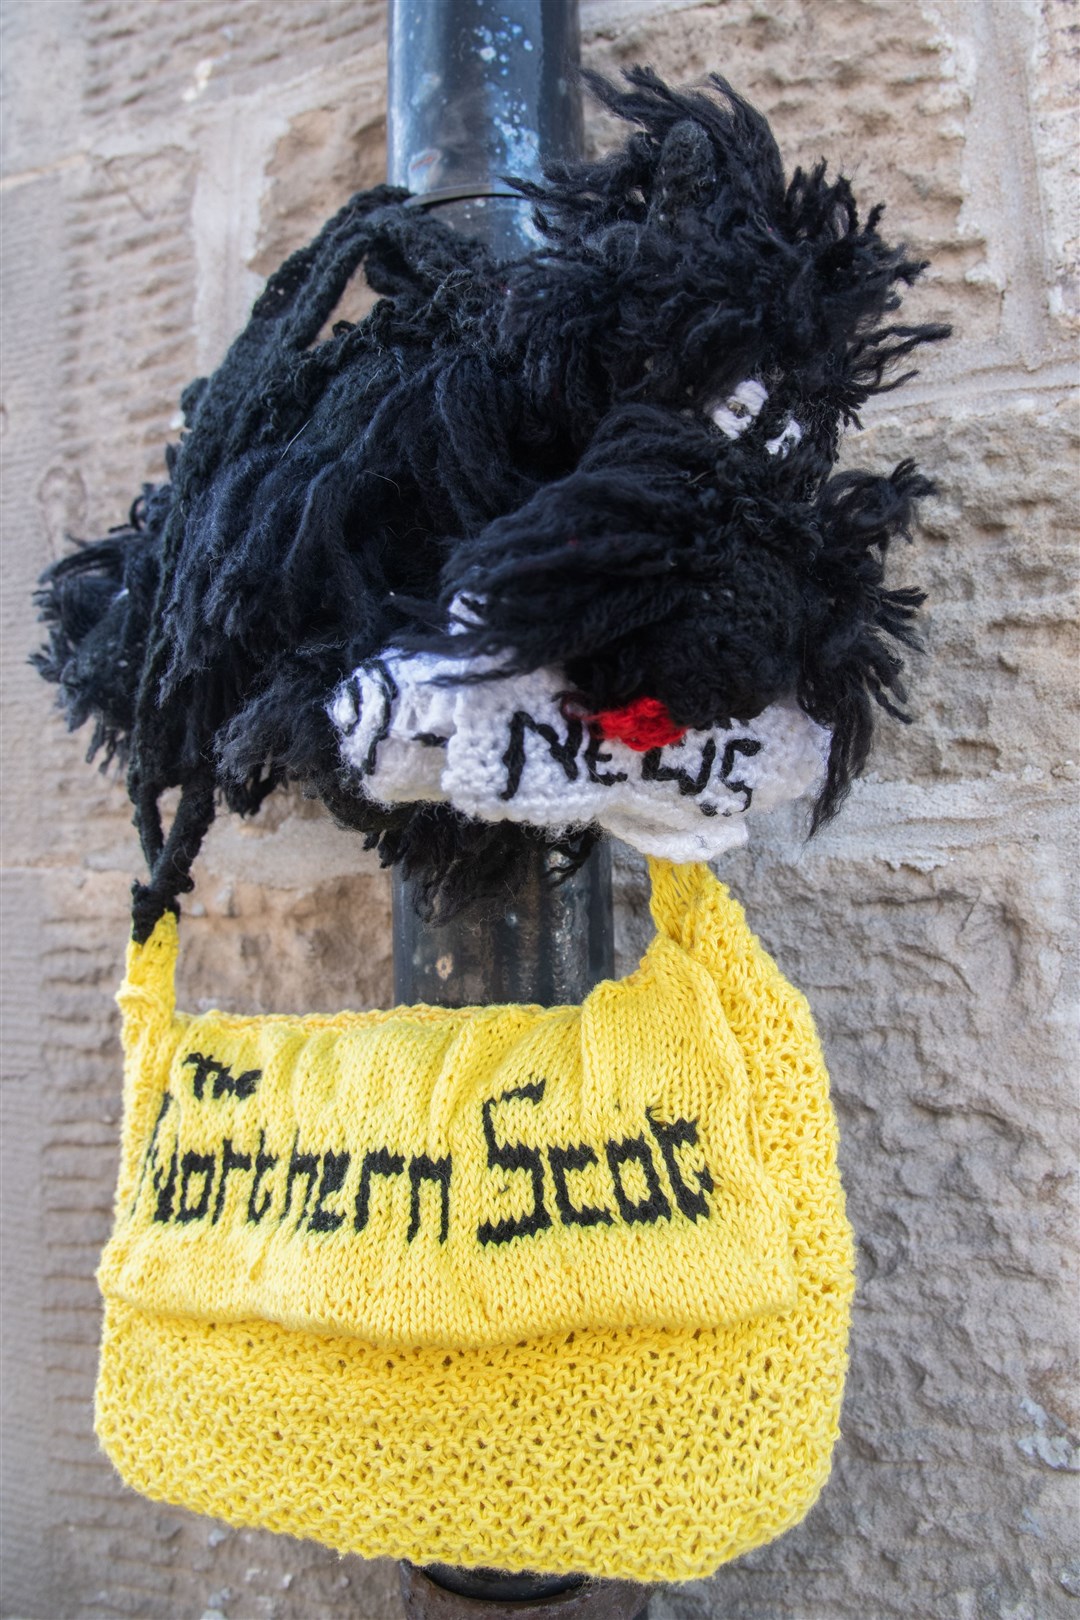 The Mystery Crocheter has created a Scotty Dog, with a newspaper and delivery bag. Picture: Daniel Forsyth..